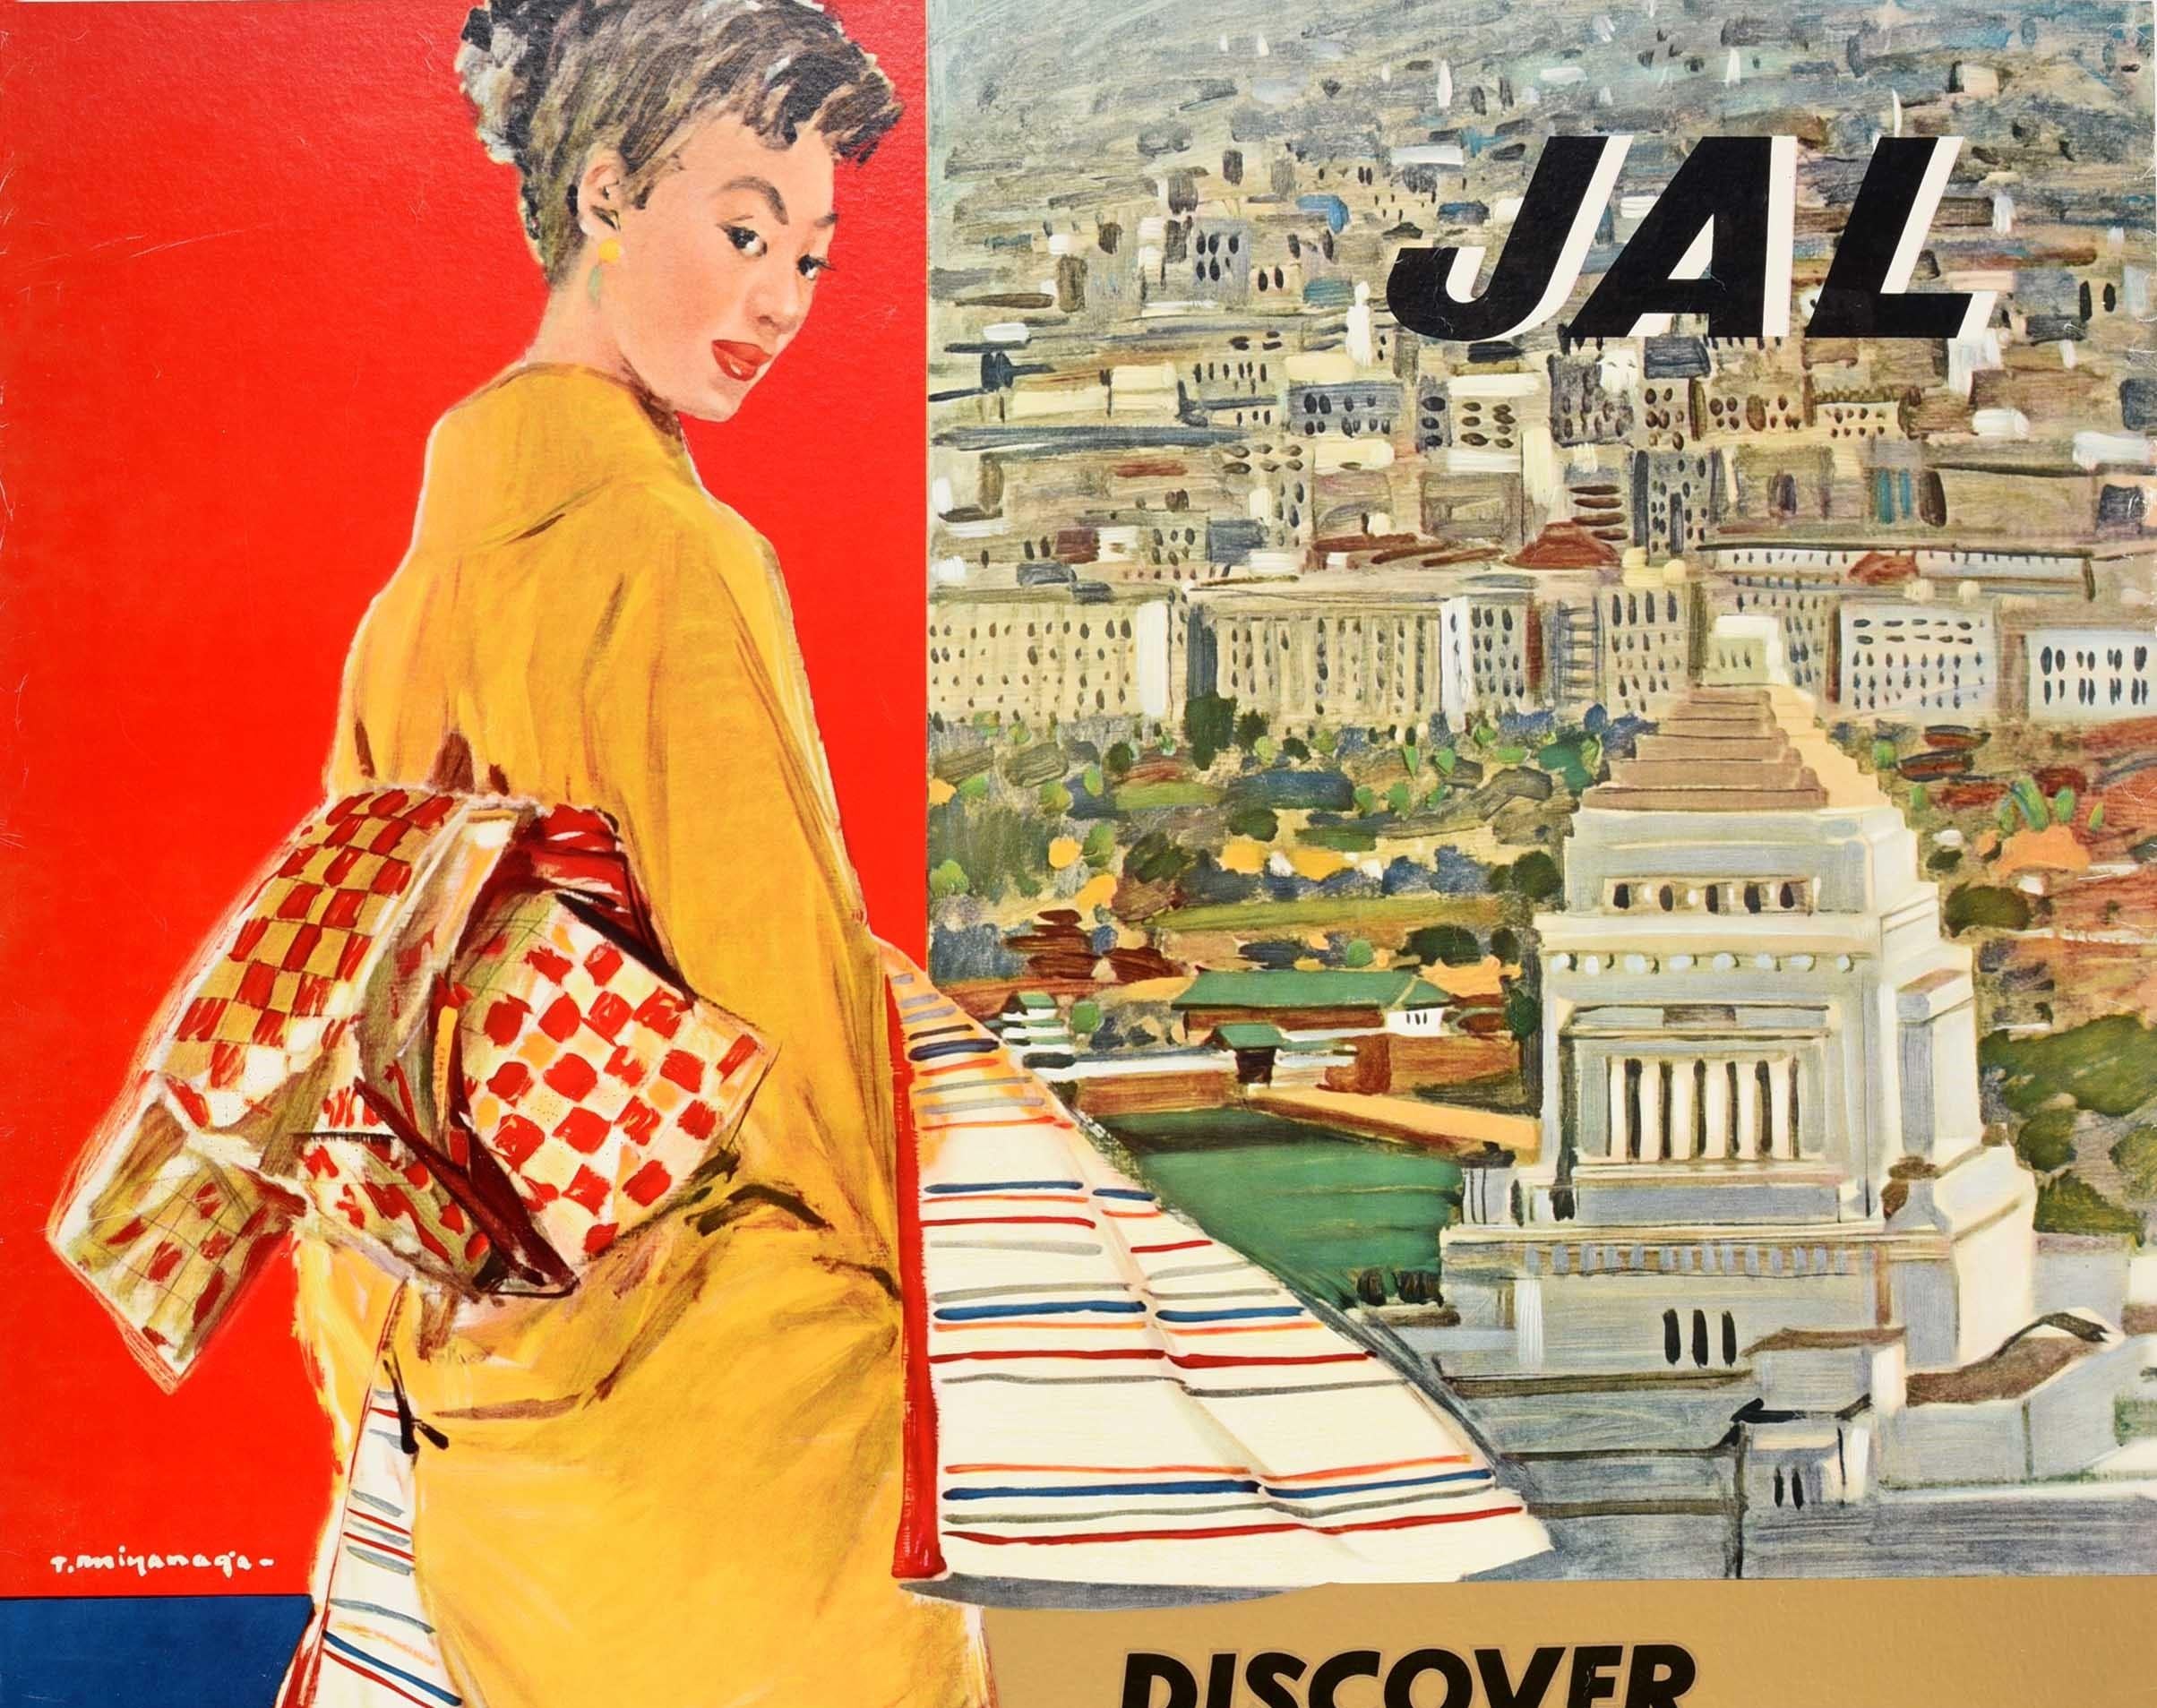 Original vintage Japan Air Lines travel poster - JAL Discover Japan - featuring a great design showing the historic architecture and city view with a colourful pattern below and artwork of a lady in a traditional kimono dress on the side.